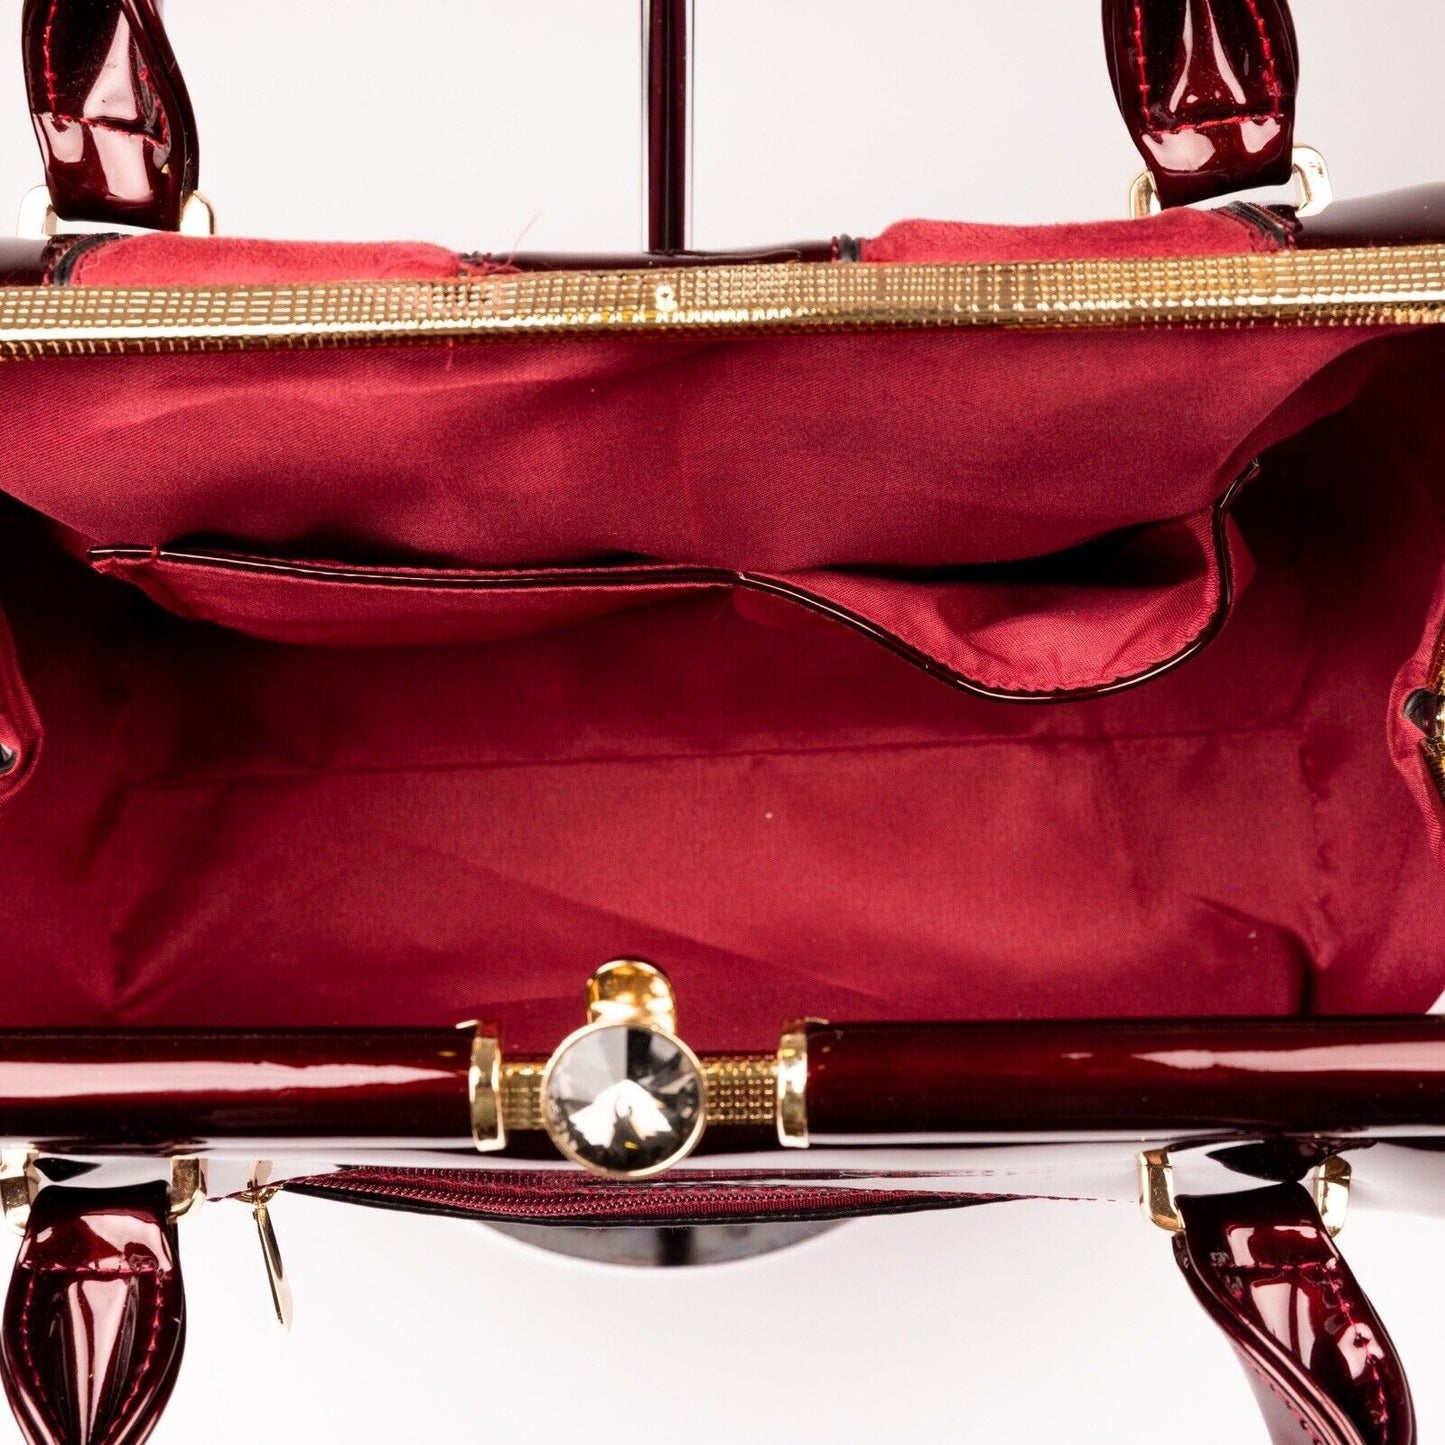 Inside View Of Ruby Red Patent Leather and Faux Suede Handbag